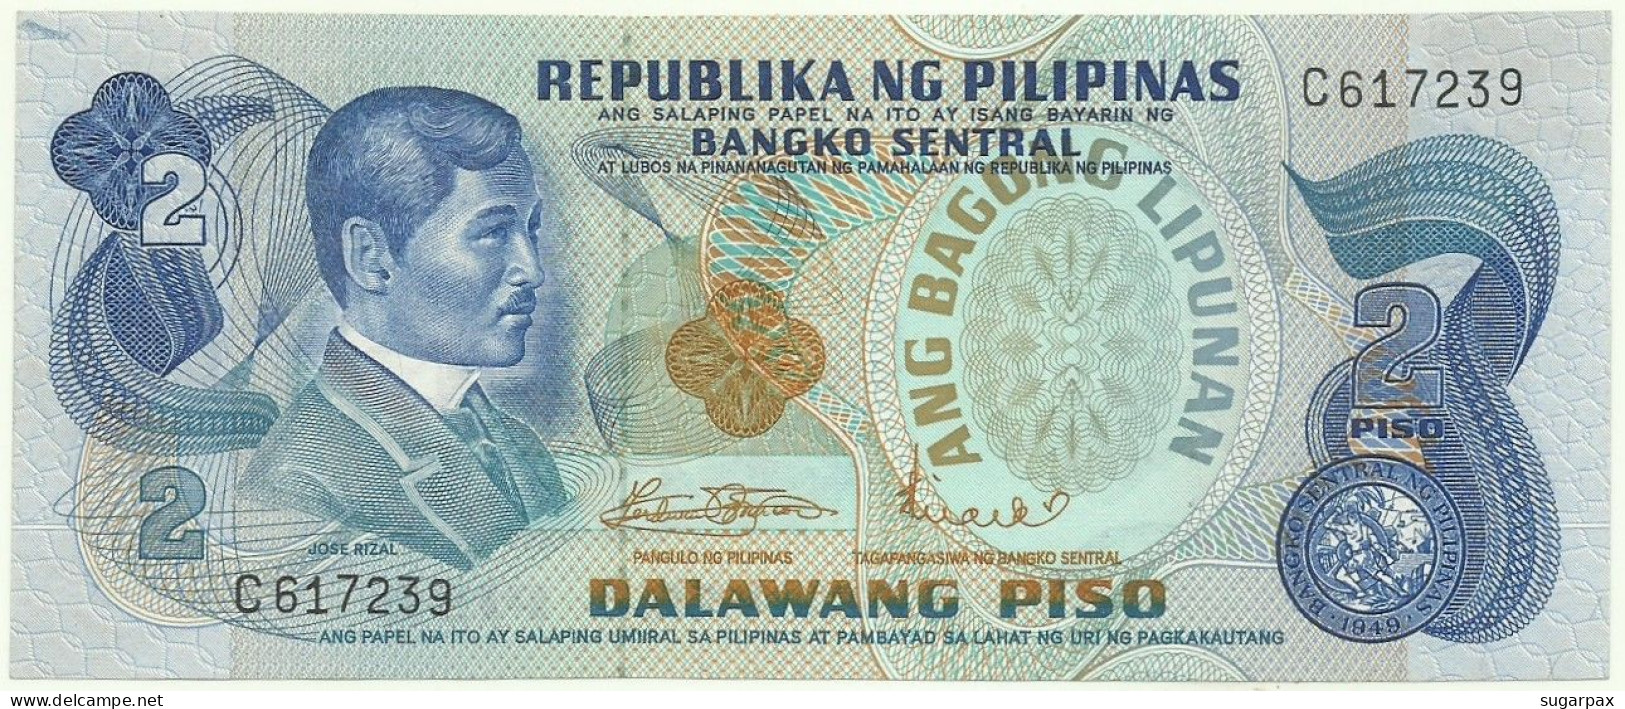 Philippines - 2 Piso - ND ( 1970s ) - Pick 152 - Unc. - Sign. 8 - Serie C - ANG BAGONG LIPUNAN ( 1974 - 1985 ) - Philippinen